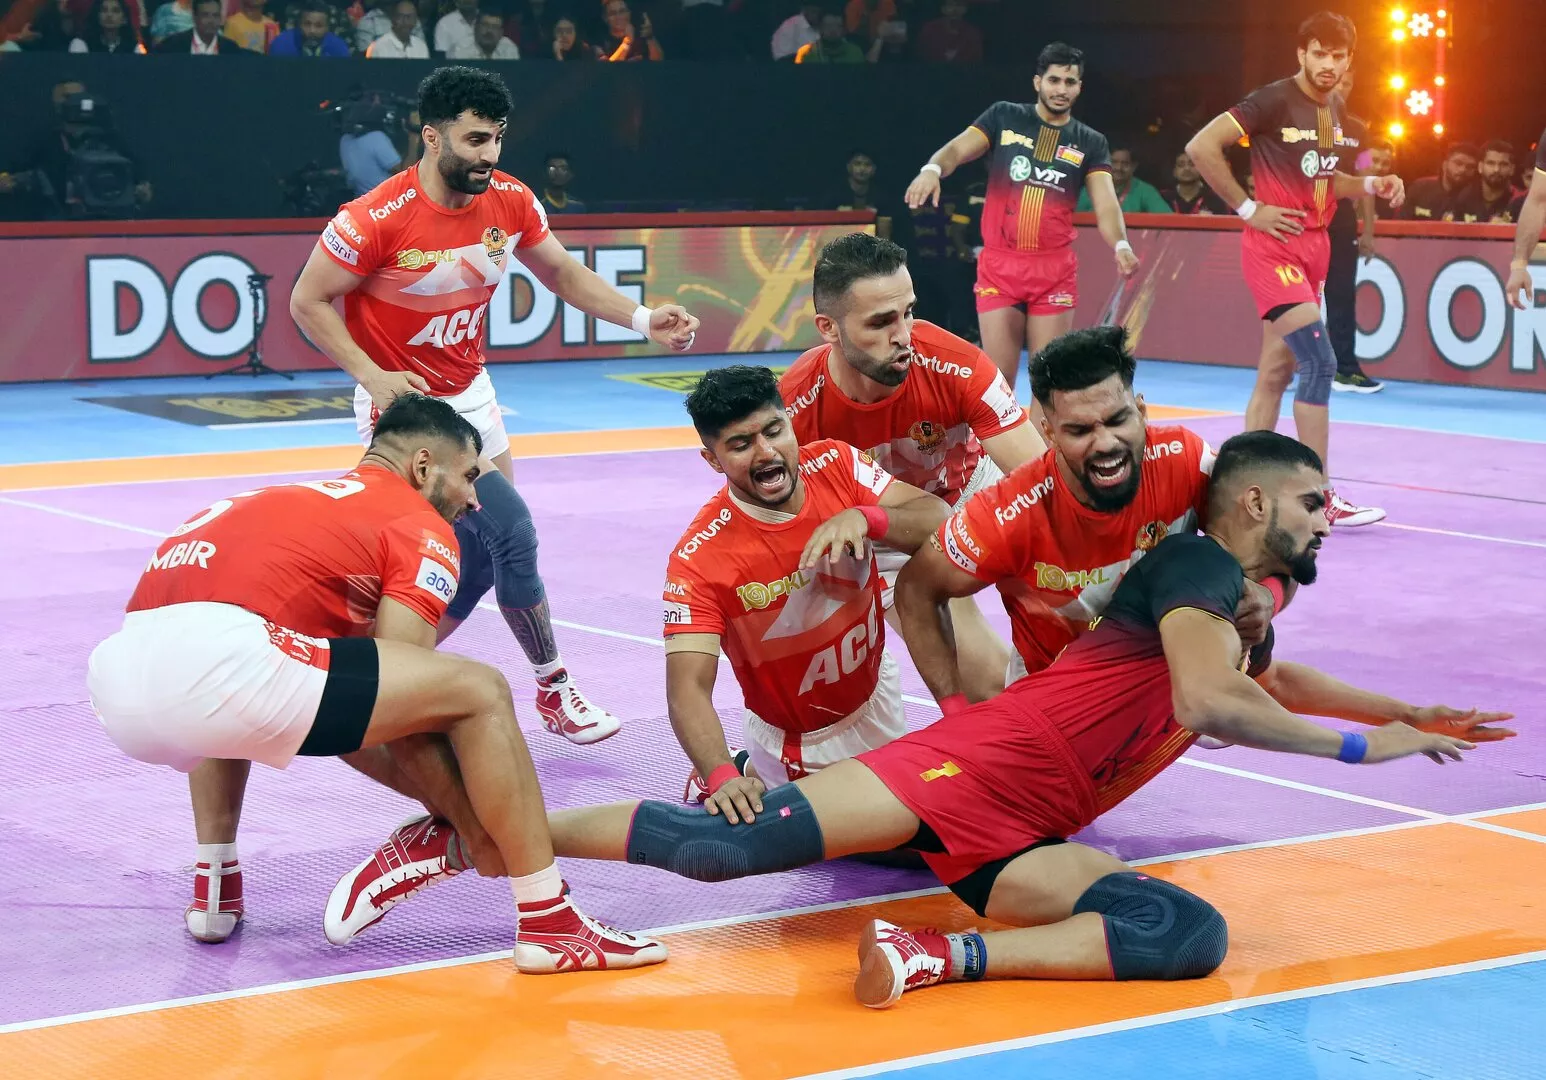 The Gujarat Giants played out a nail-biting match against Bengaluru Bulls at the EKA Arena by TransStadia on Sunday in match 4 of PKL 10.